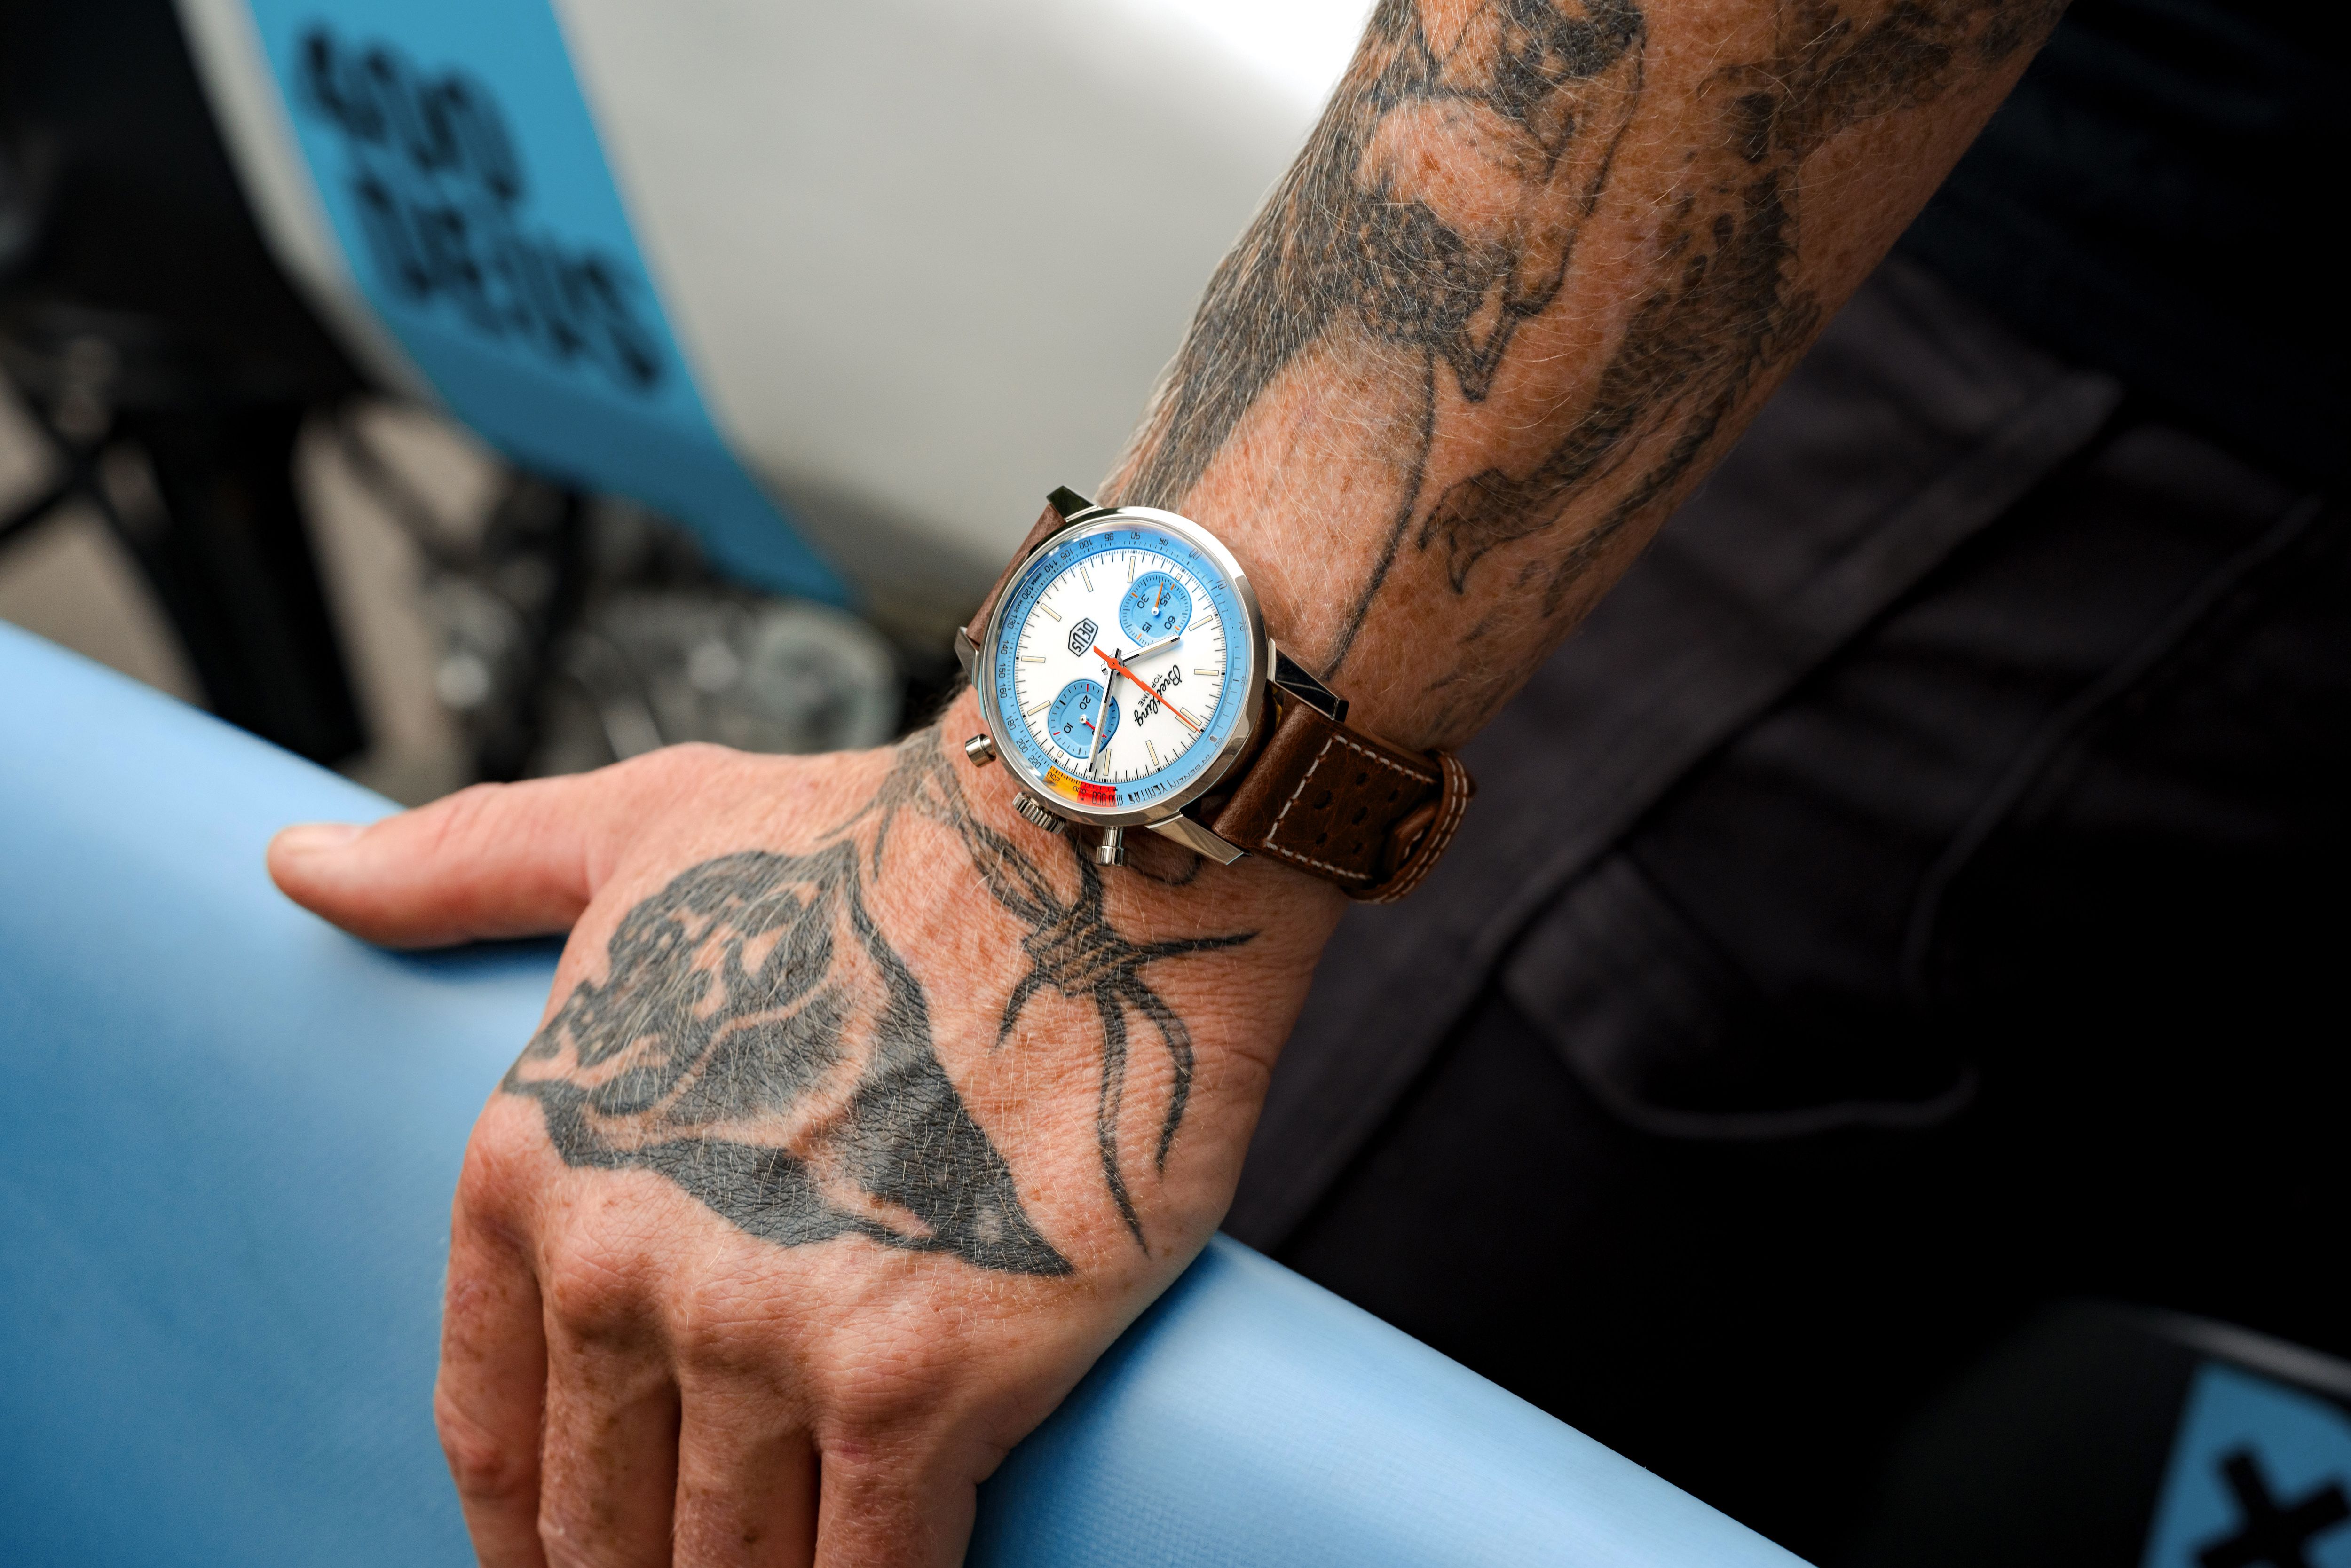 Breitling Reunites With Deus Ex Machina on a New Watch for “Bikers, Boarders and Surfers”